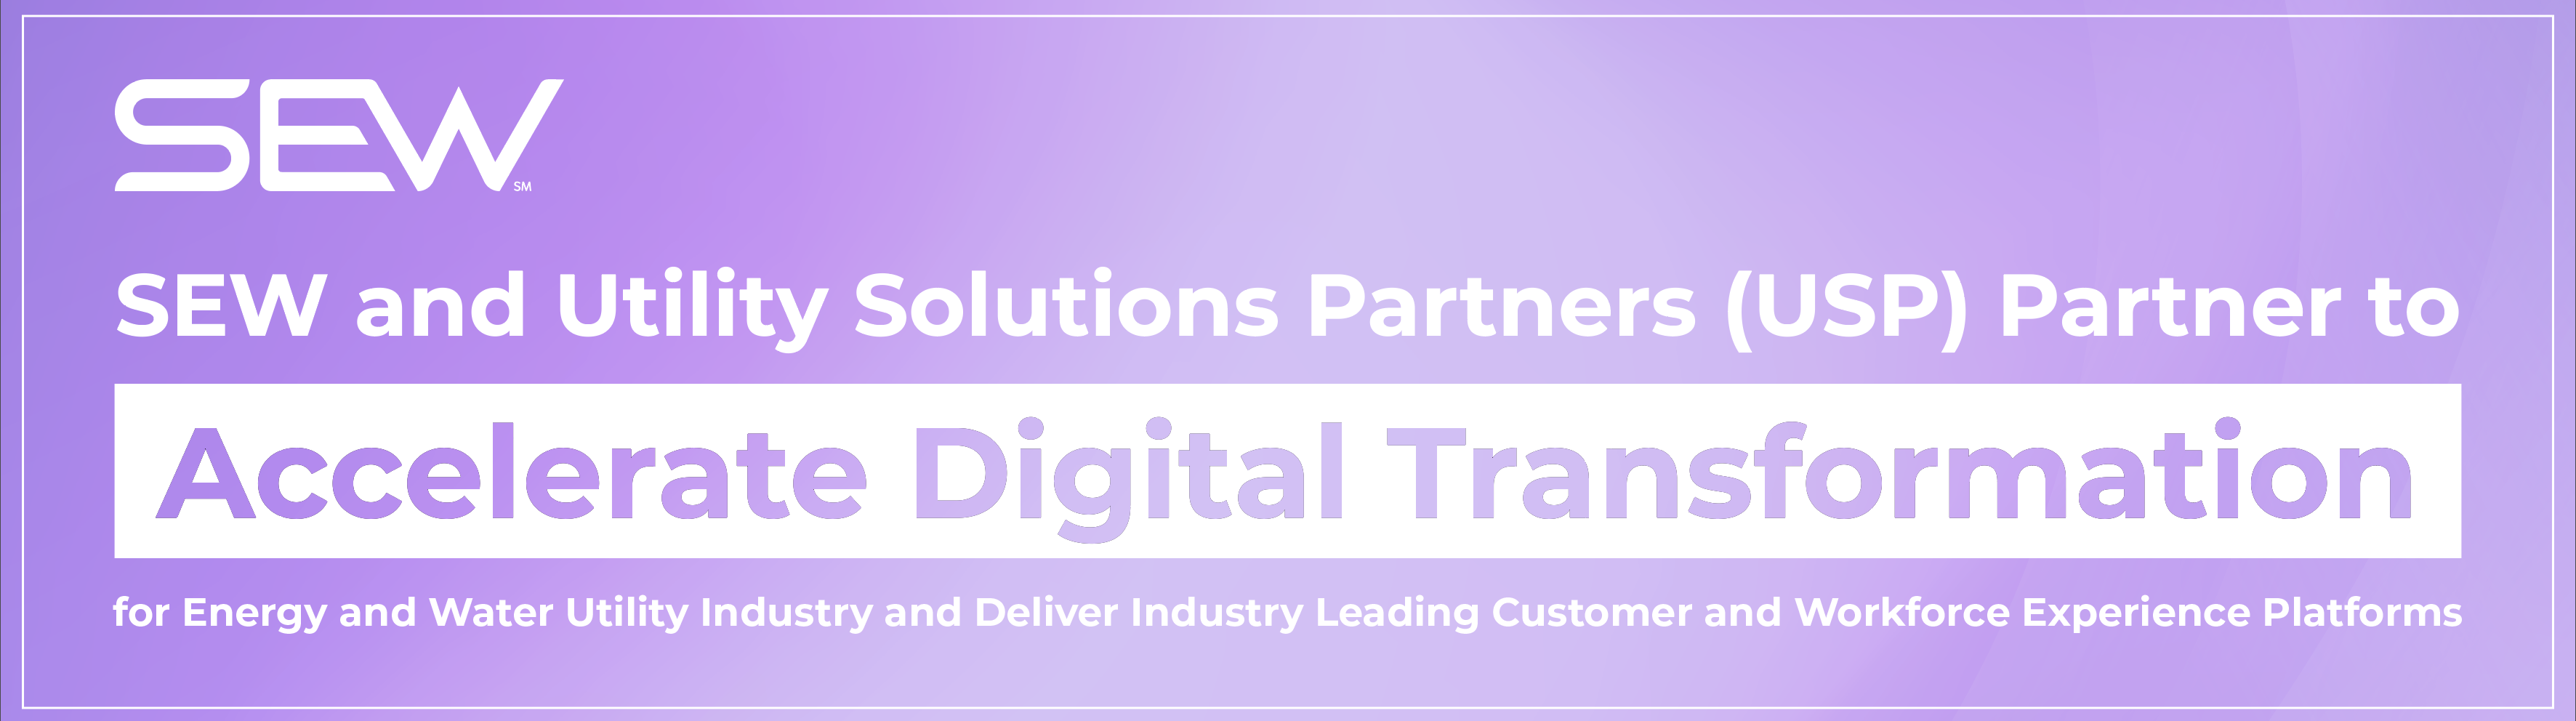 SEW and Utility Solutions Partners (USP) Partner to Accelerate Digital Transformation for Energy and Water Utility Industry and Deliver Industry Leading Customer and Workforce Experience Platforms